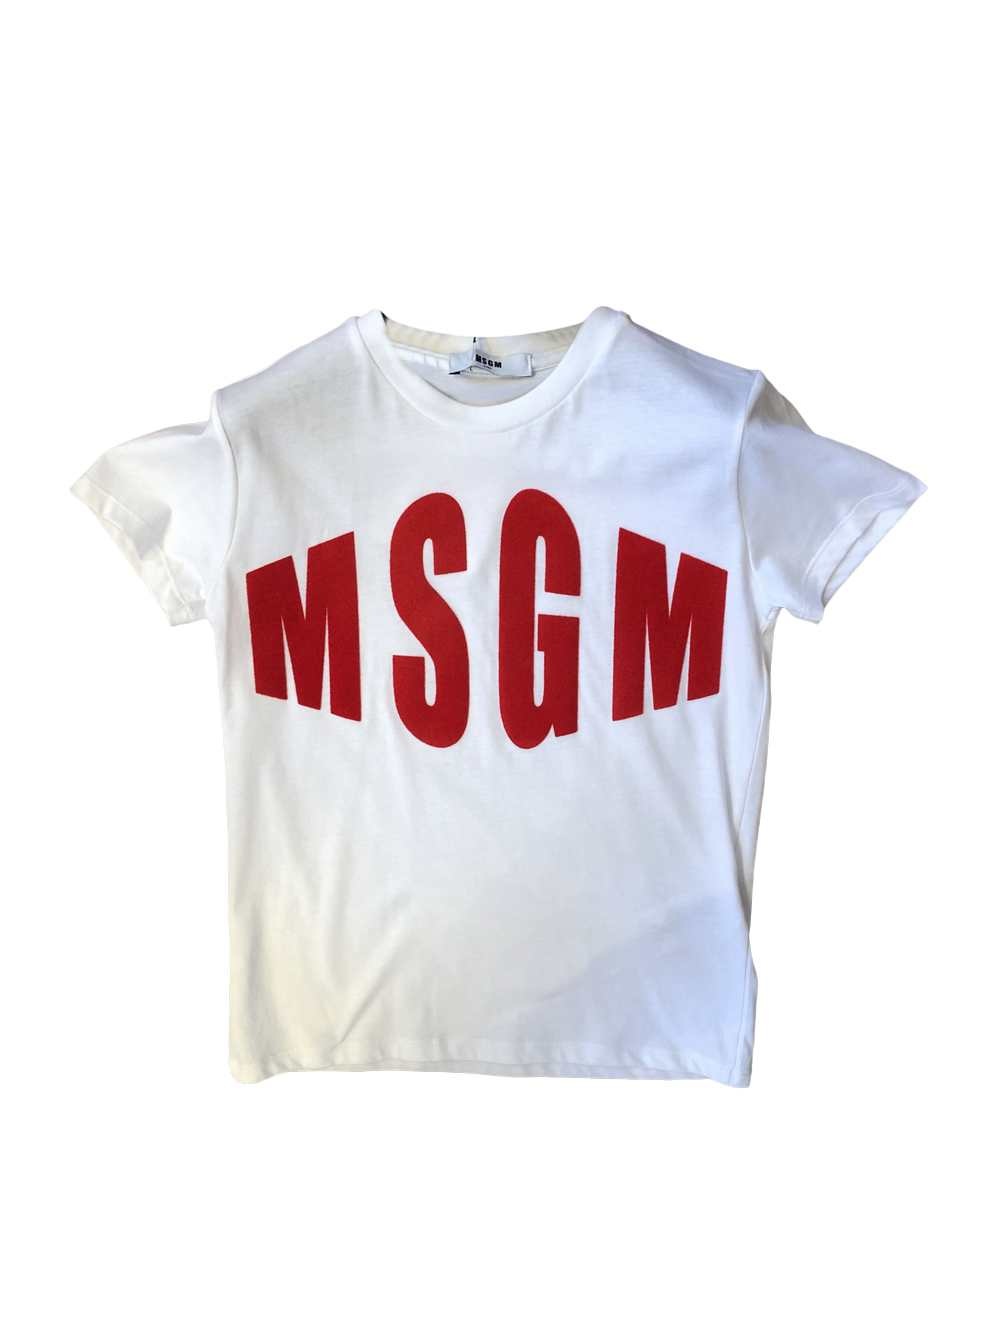 MSGM wit rode letters